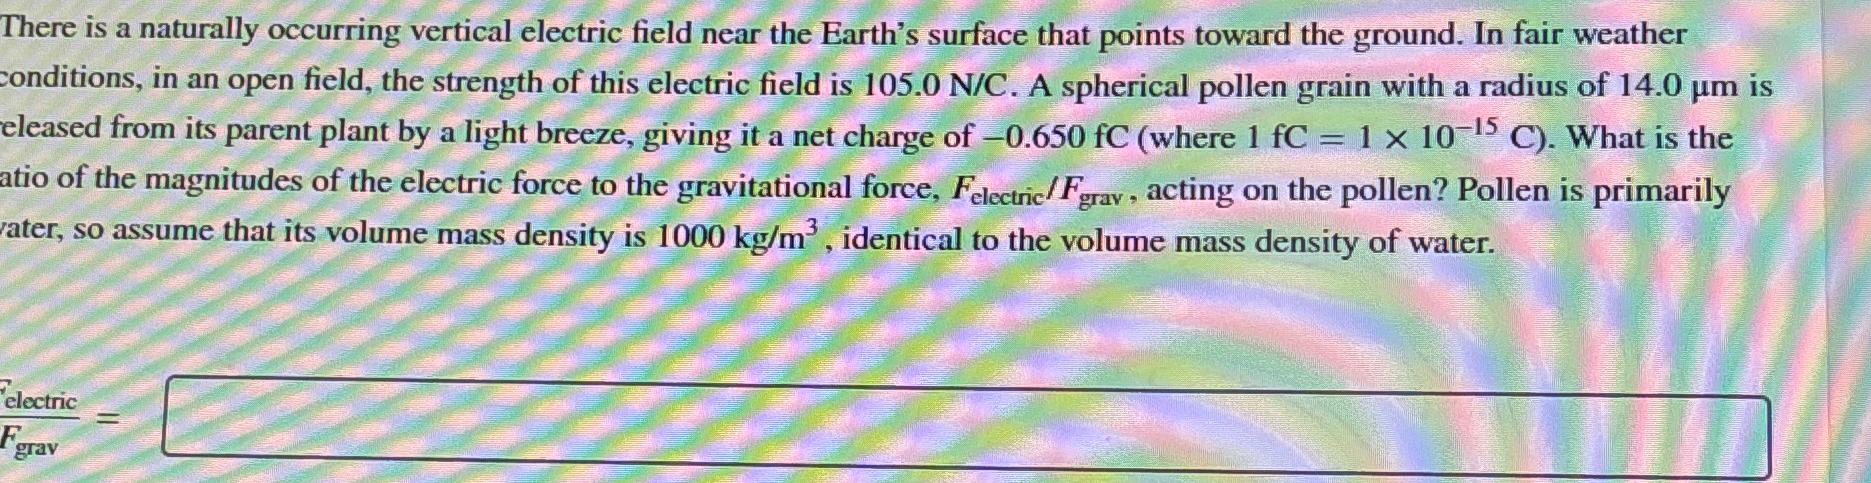 There is a naturally occurring vertical electric field near the Earth's surface that points toward the